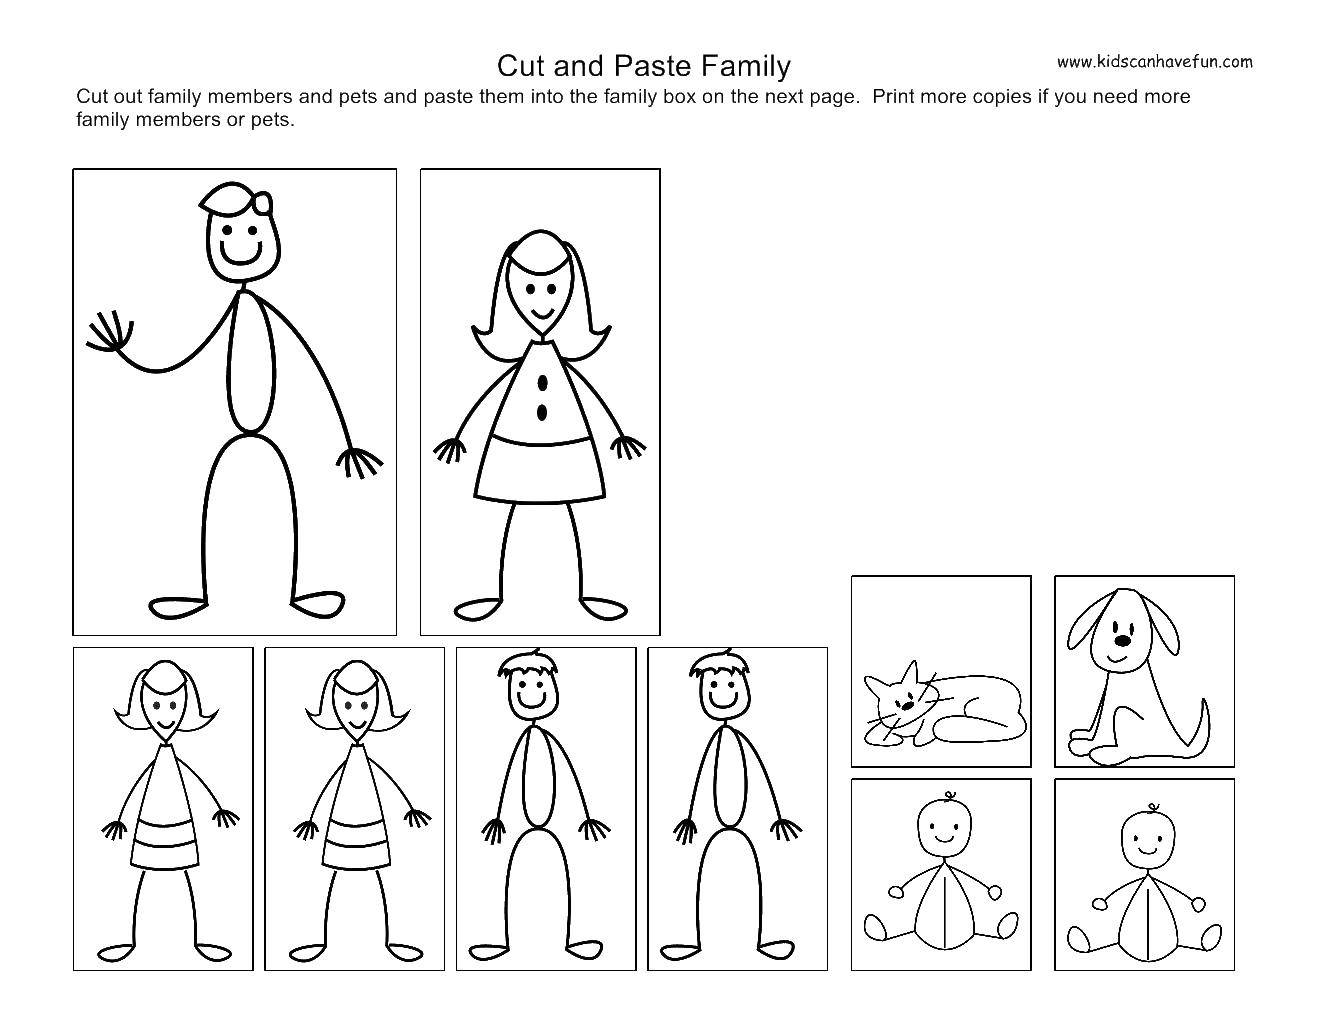 Coloring Family members. Category Templates for cutting out. Tags:  templates, family, family members.